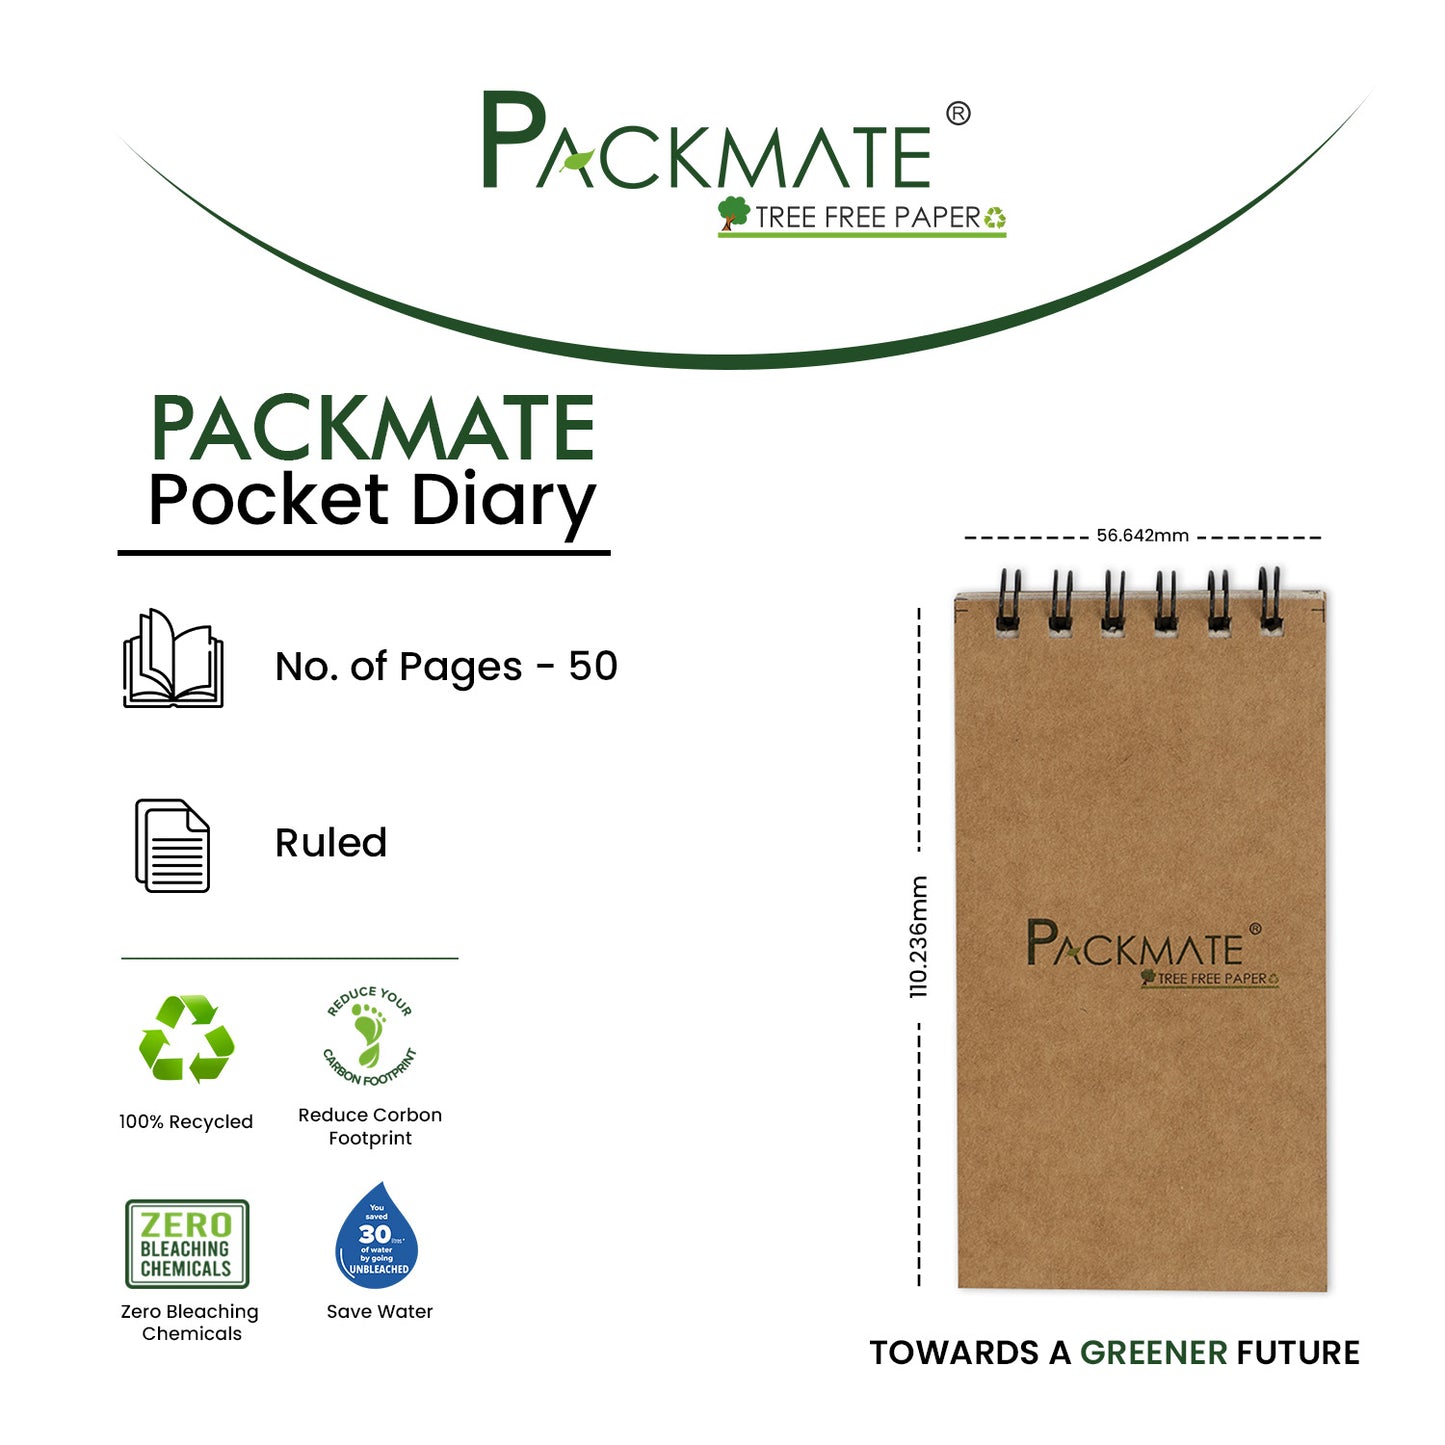 Packmate Ruled Pocket Diary | Pack of 10 | Made from 100% Recycled Paper